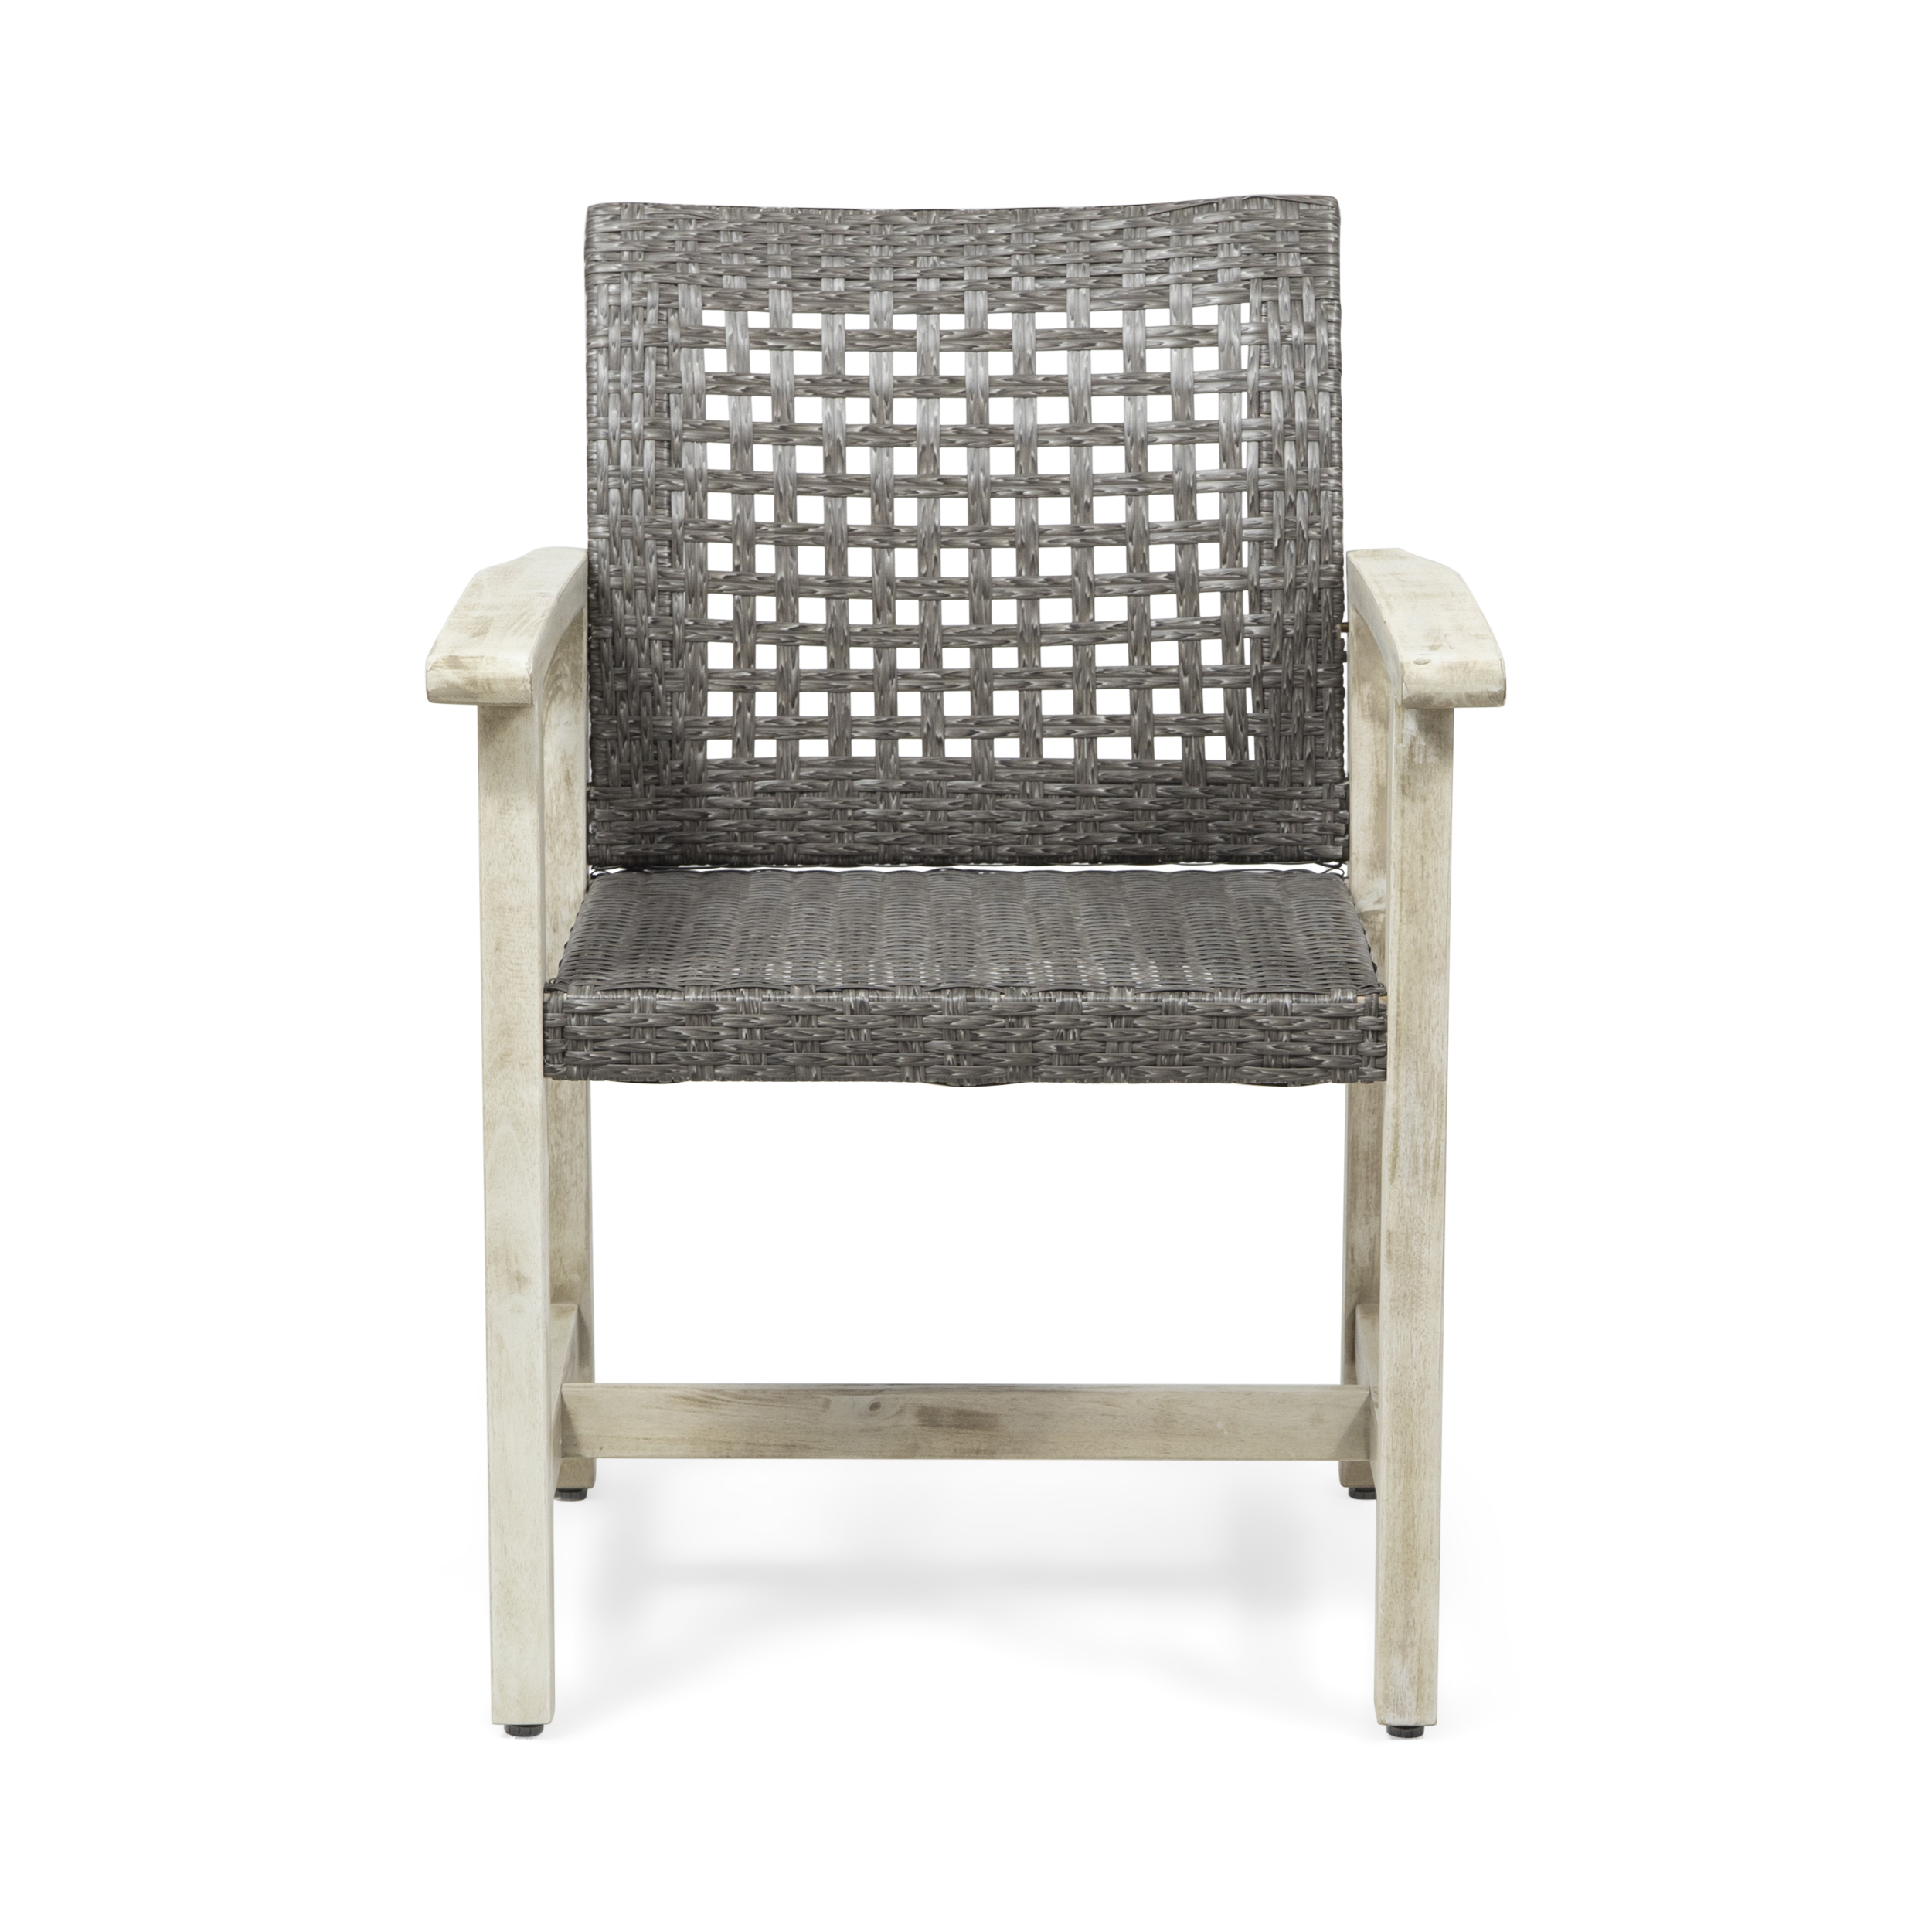 GDF Studio Beacher Outdoor Acacia Wood and Wicker Dining Chair (Set of 2), Light Gray Wash and Mix Black - image 3 of 11